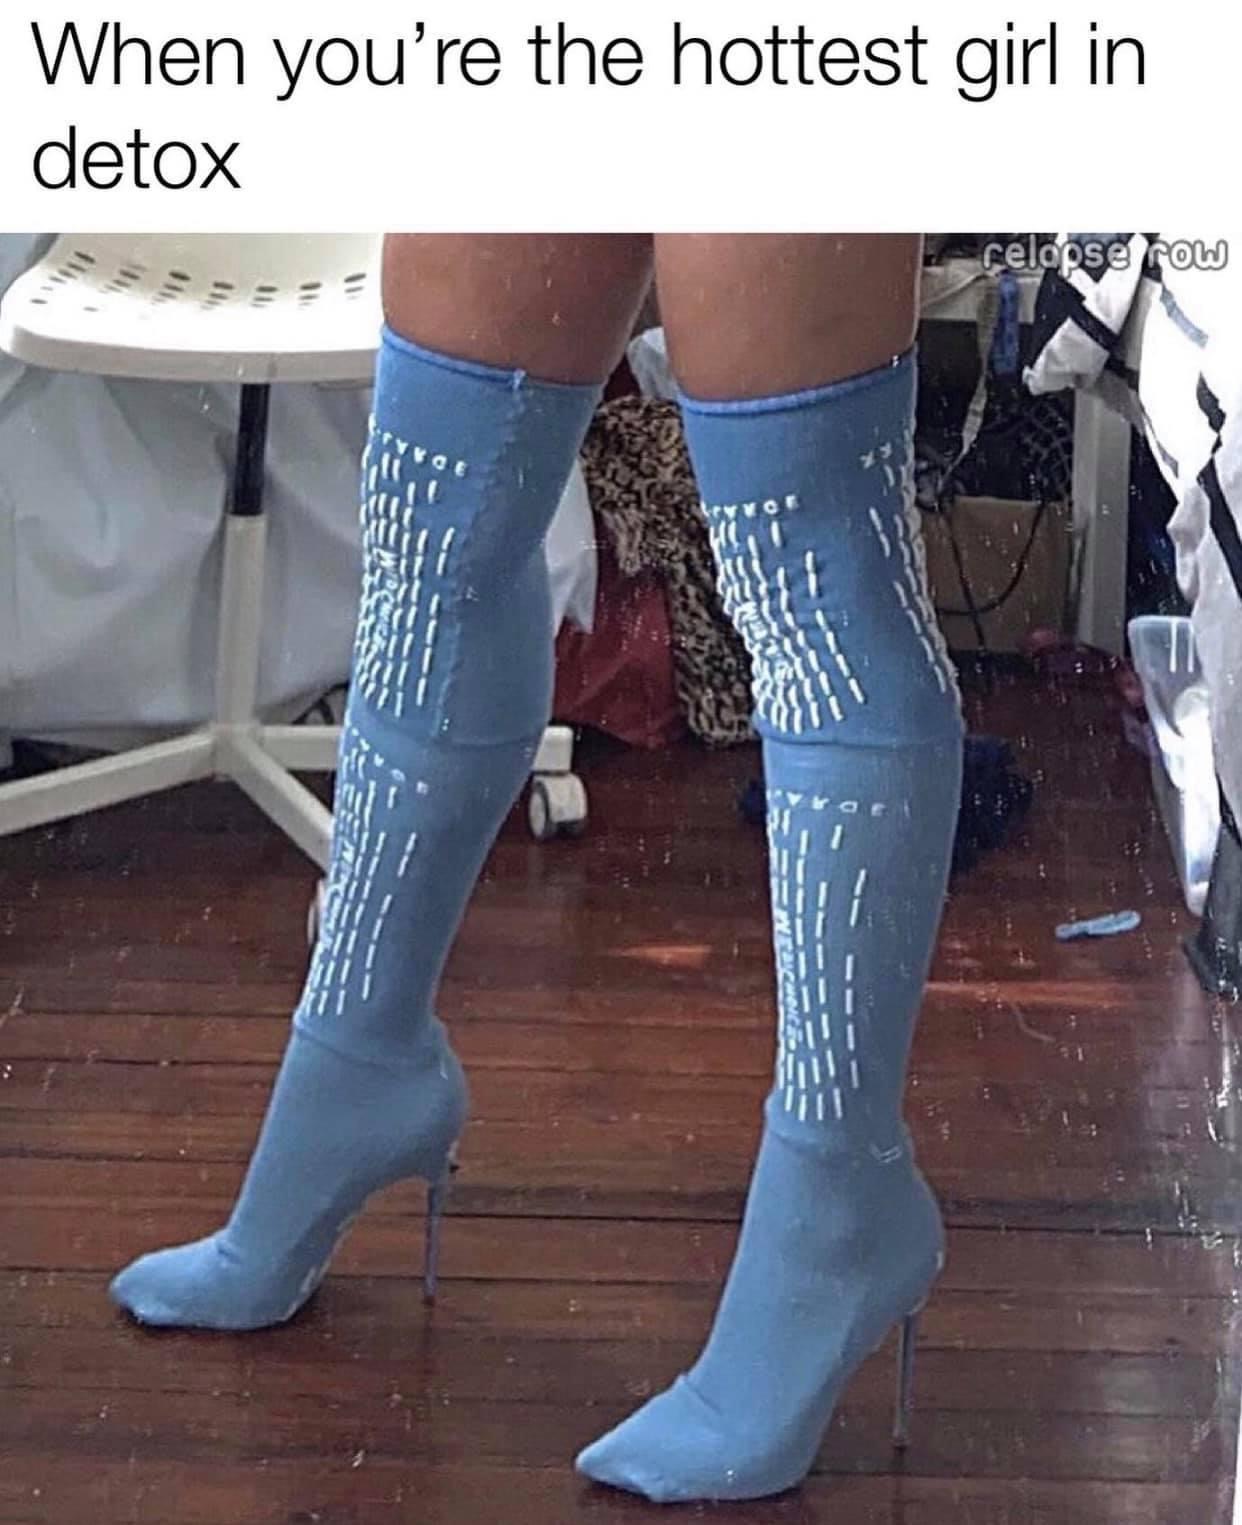 psych ward socks - When you're the hottest girl in detox celopsgrow 1